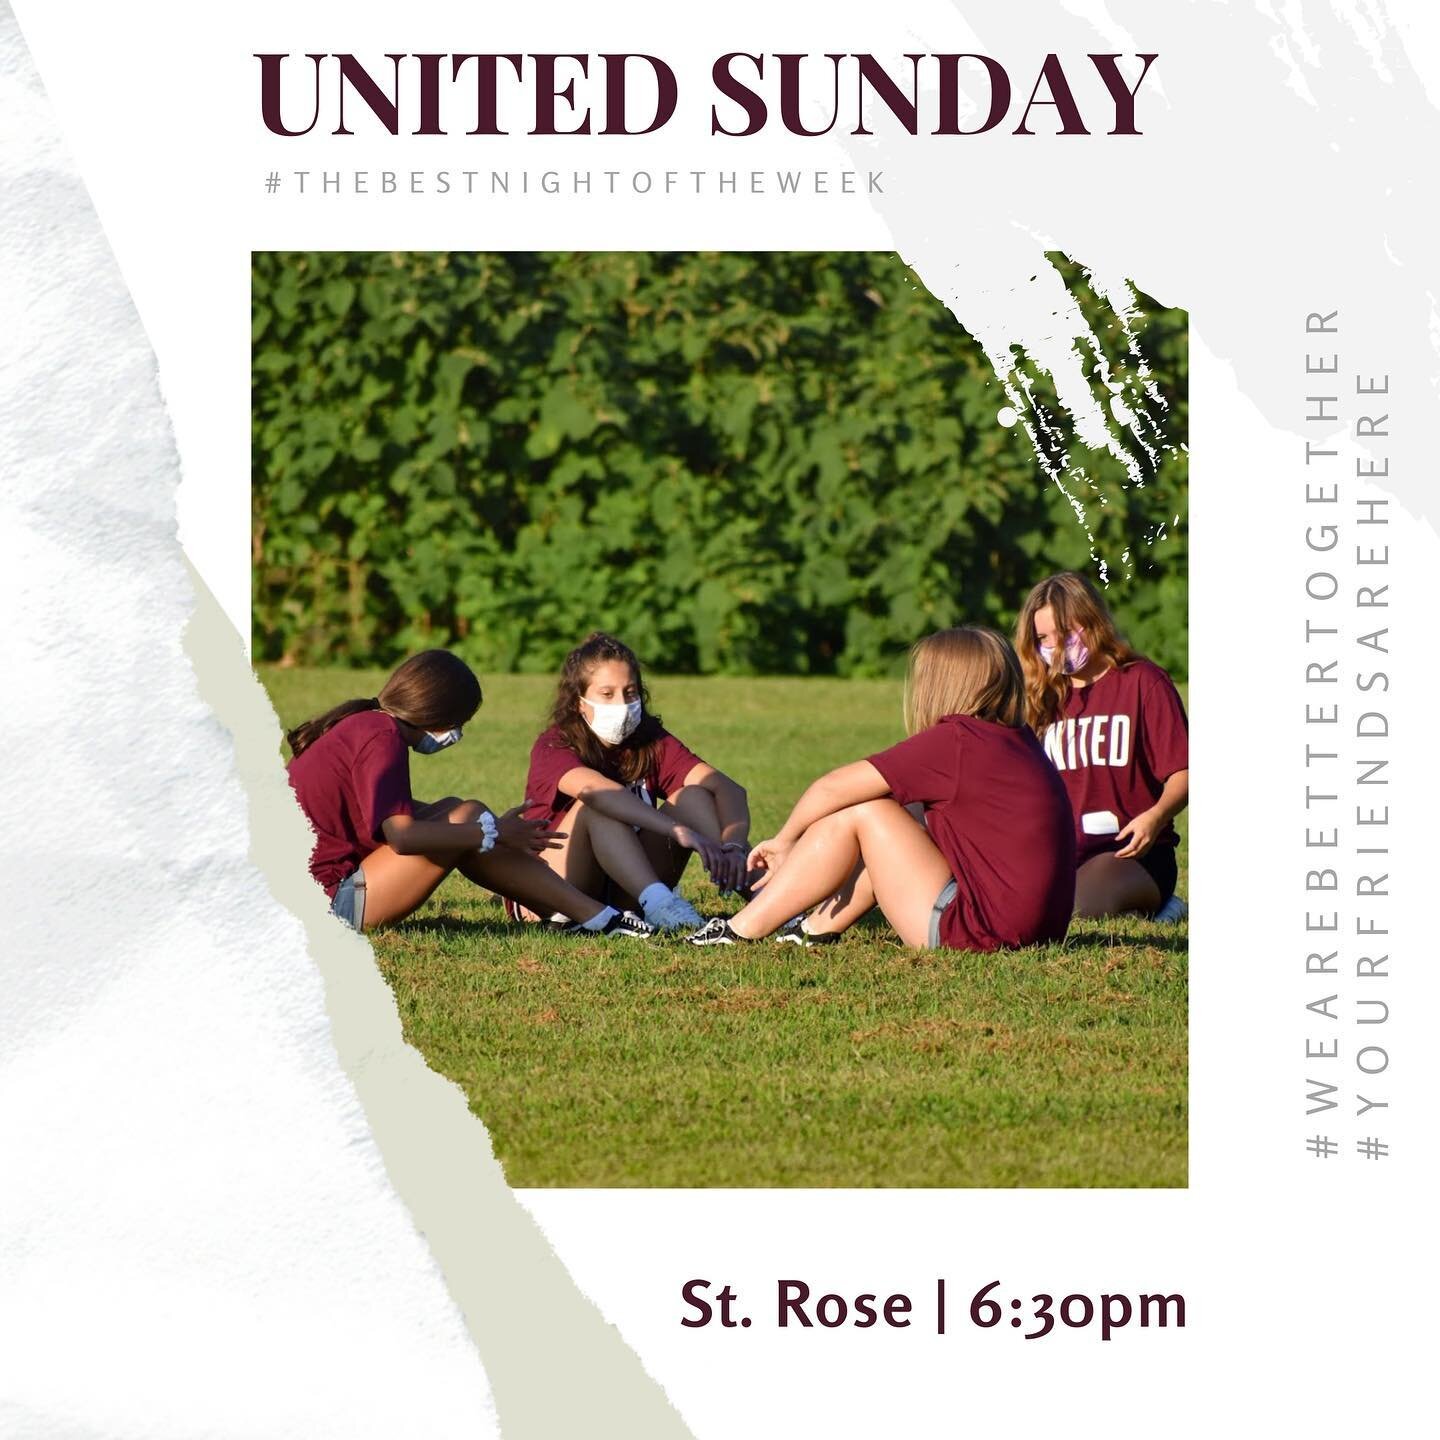 💥💥💥
United Sunday tonight!

Meet in the field at 6:30 bring a chair, a mask, and a friend!

#thebestnightoftheweek
#wearebettertogeher 
#yourfriendsarehere